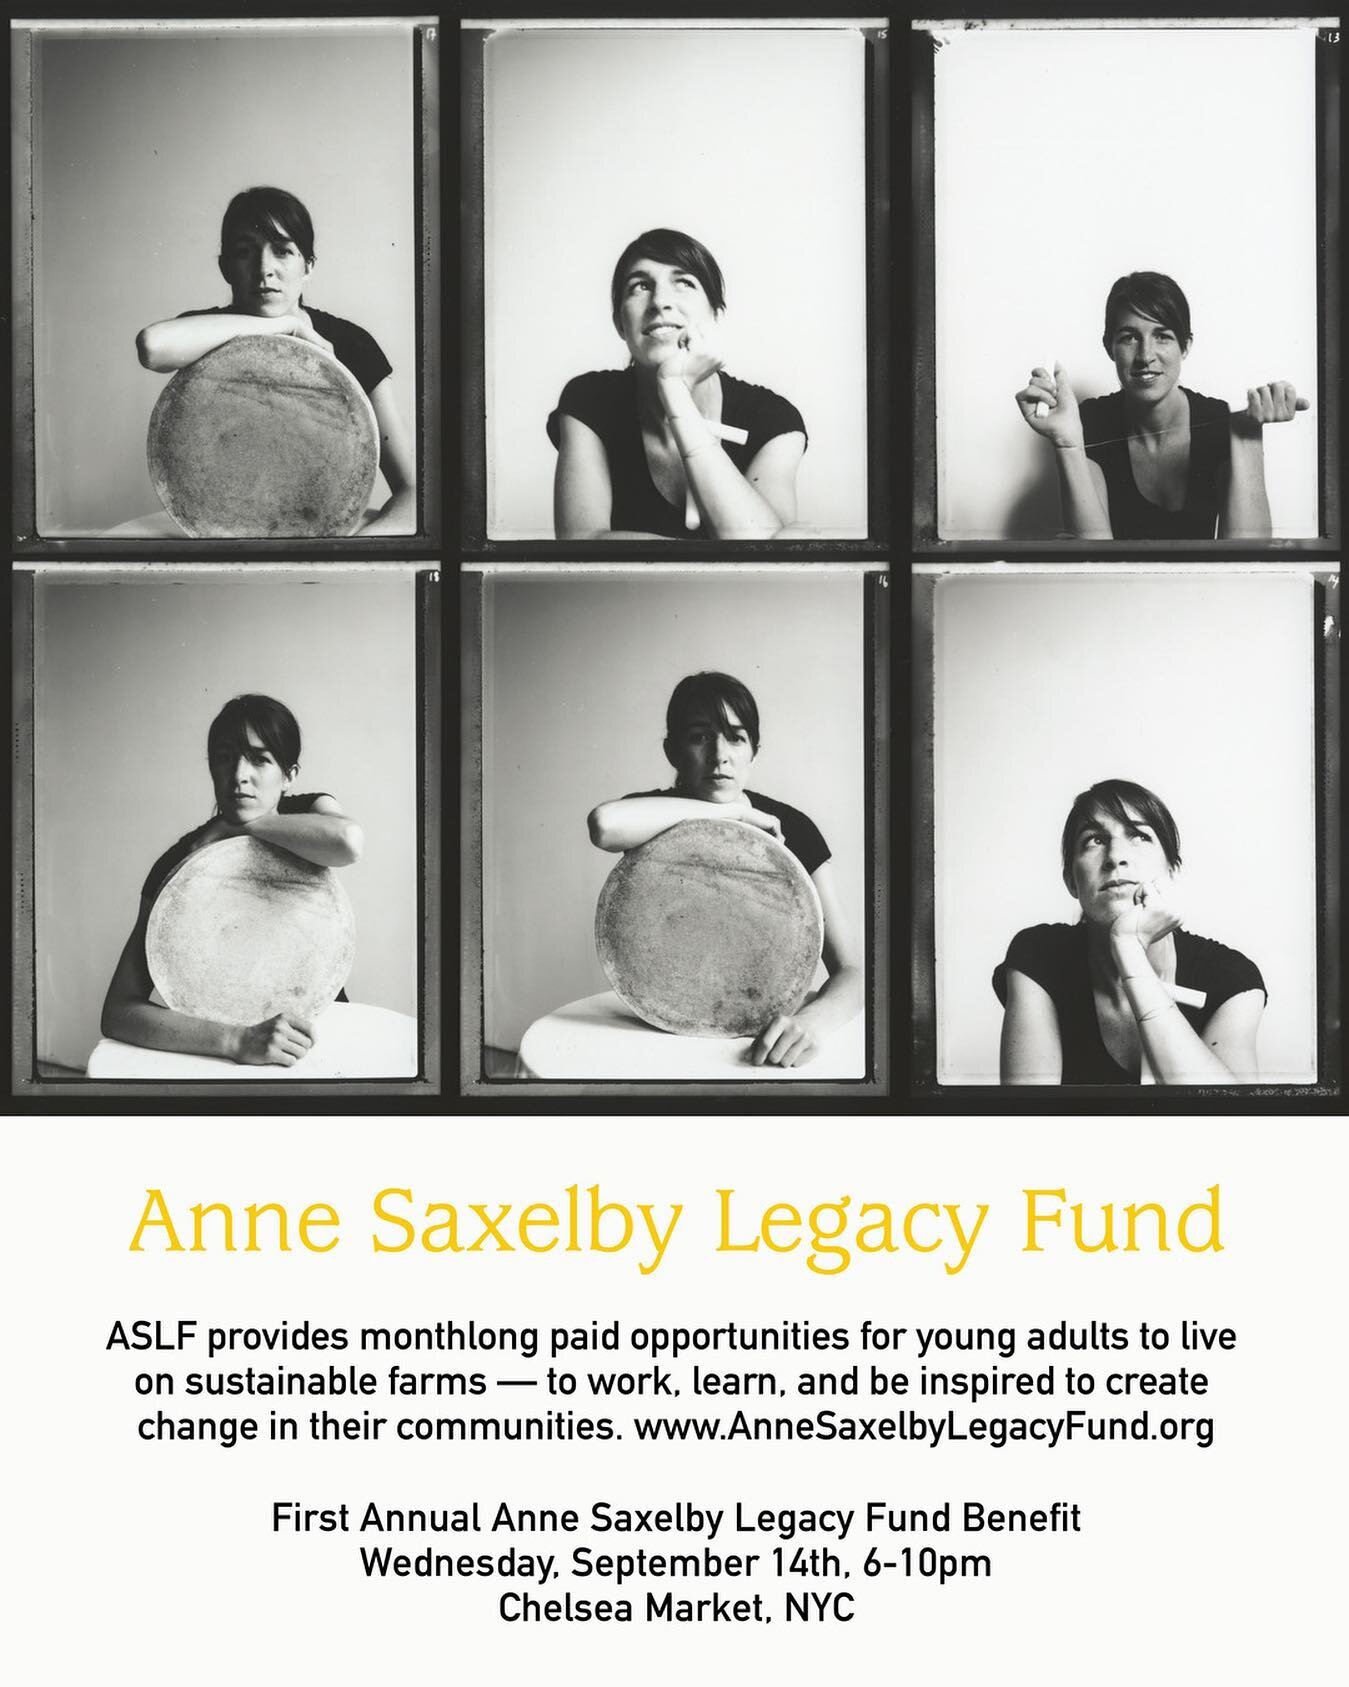 We hope you will join us at the first Anne Saxelby Legacy Fund Benefit Wednesday, September 14th at Chelsea Market!
⠀⠀⠀⠀⠀⠀⠀⠀⠀
Anne was a dear friend to our family of restaurants (@themarlowcollective) and did so much to promote rural communities in t